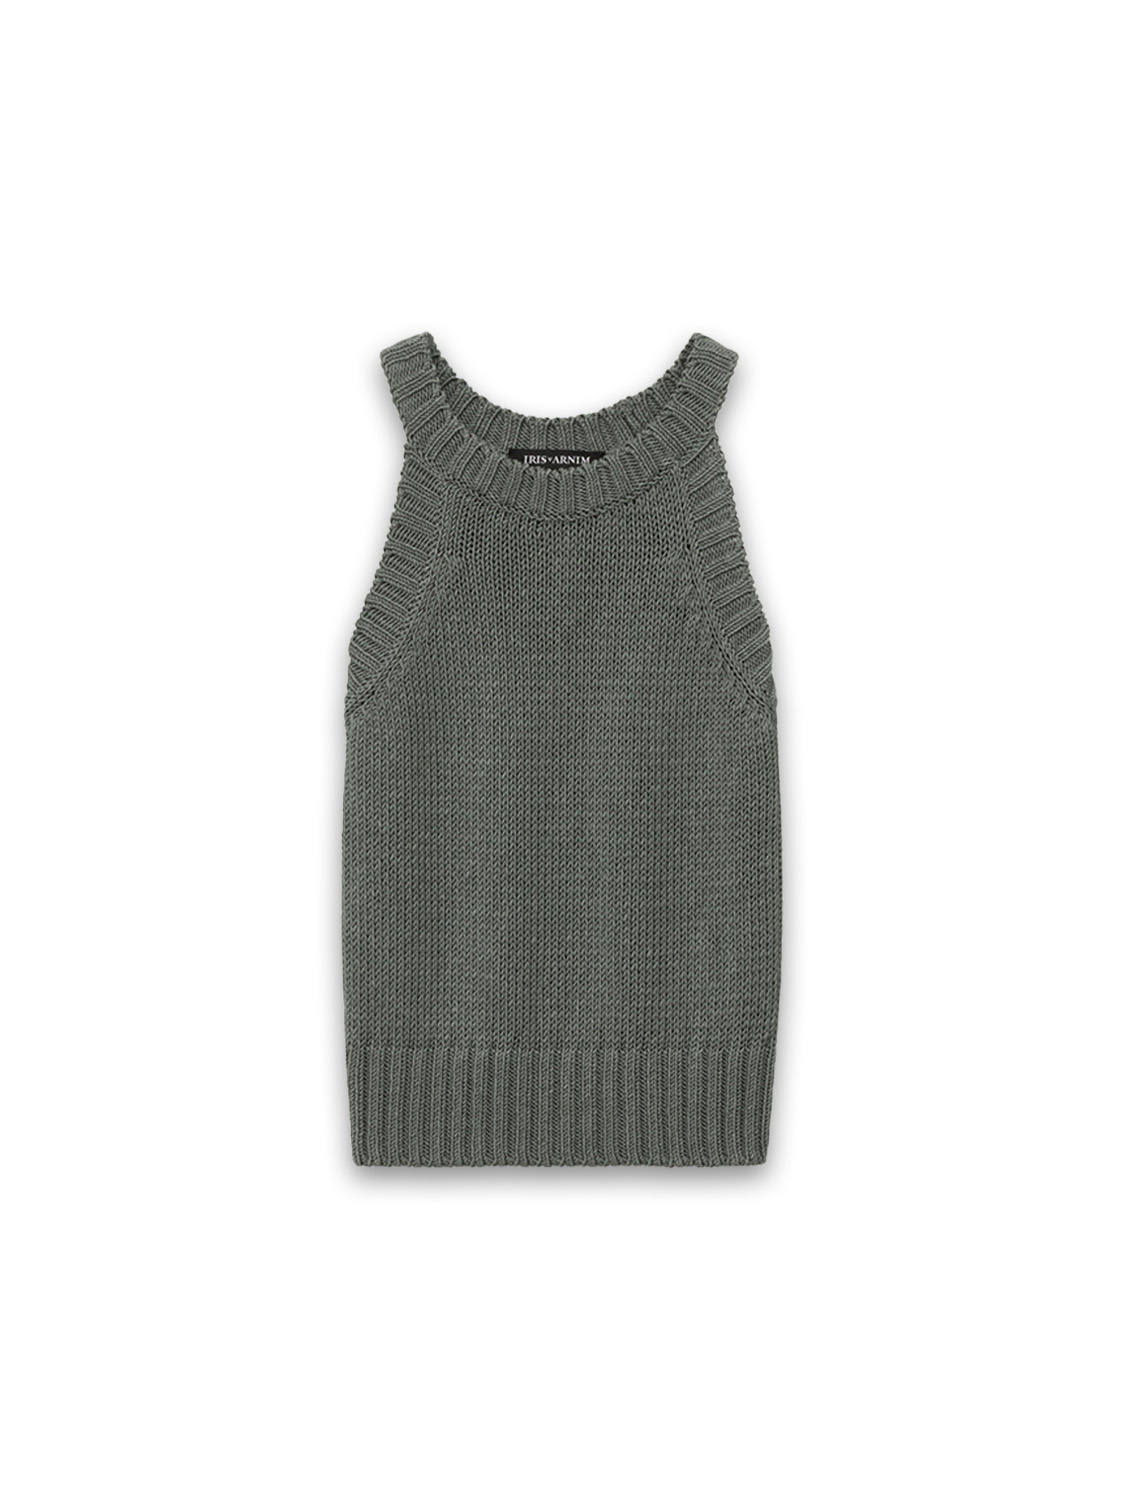 Suza – knitted top made from a silk and cotton mix 